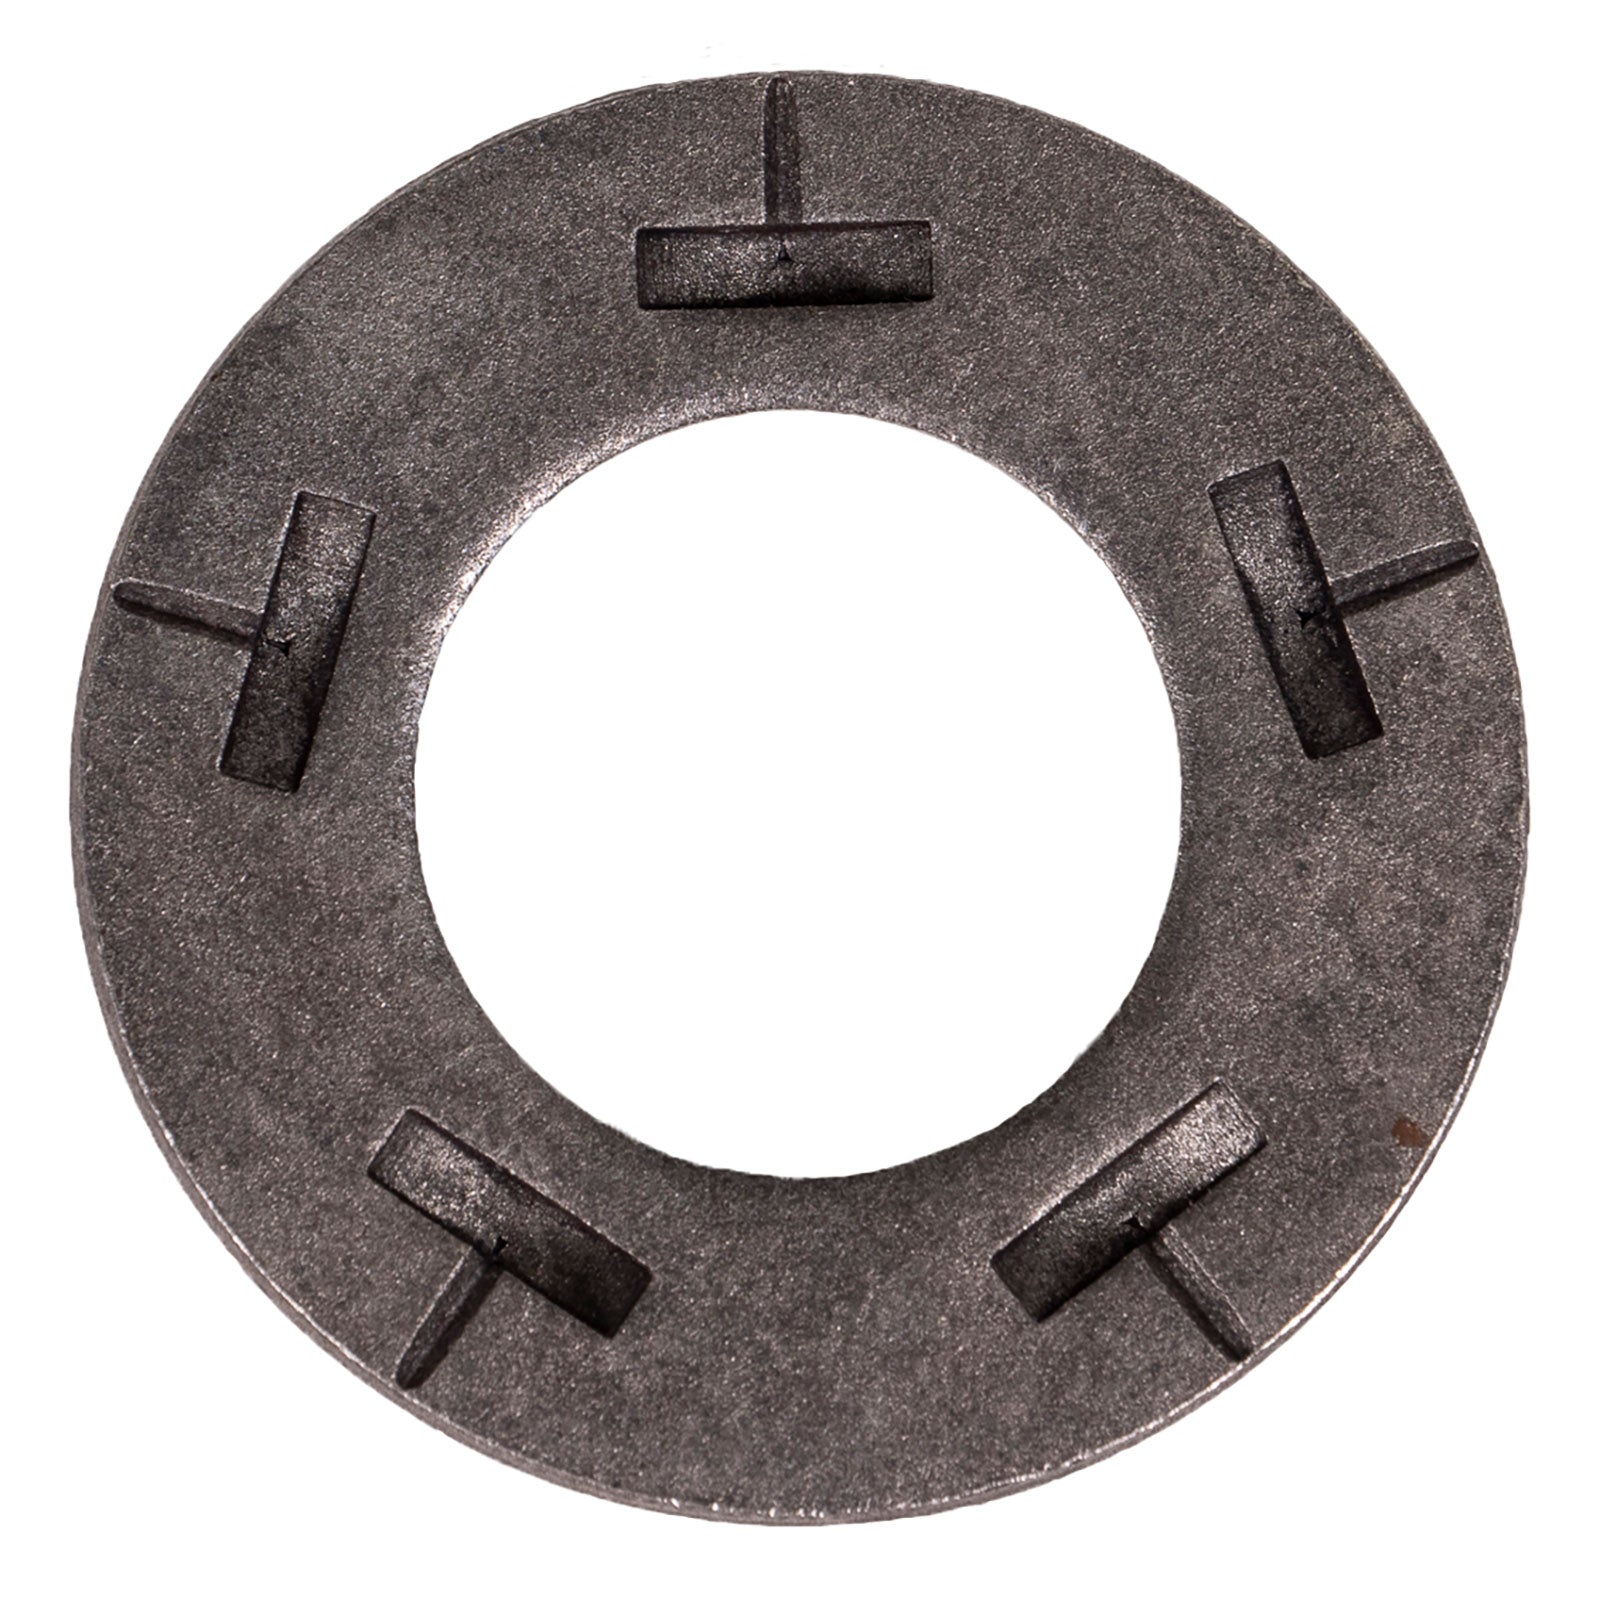 7/8" Conquest DTI Flat Washer 